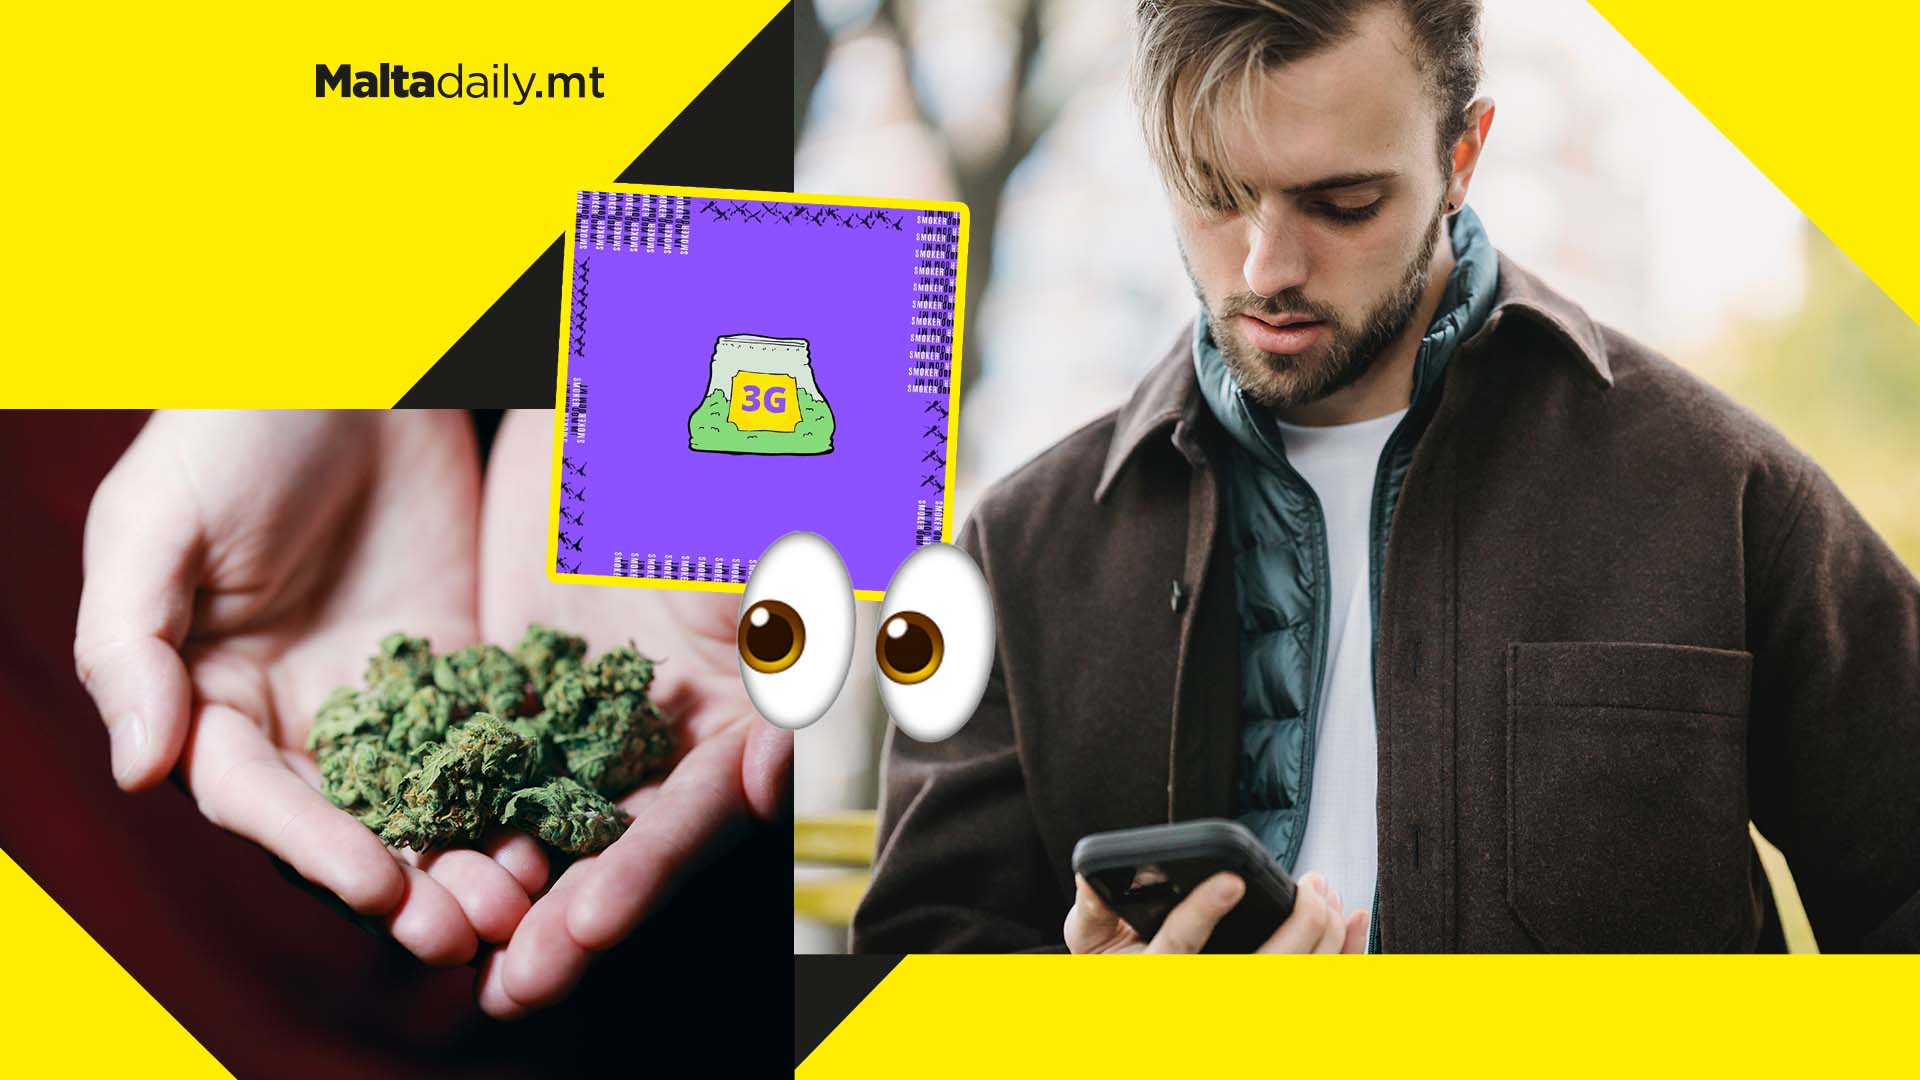 New trend? Is this Maltese Instagram page giving away 3 grams of weed?